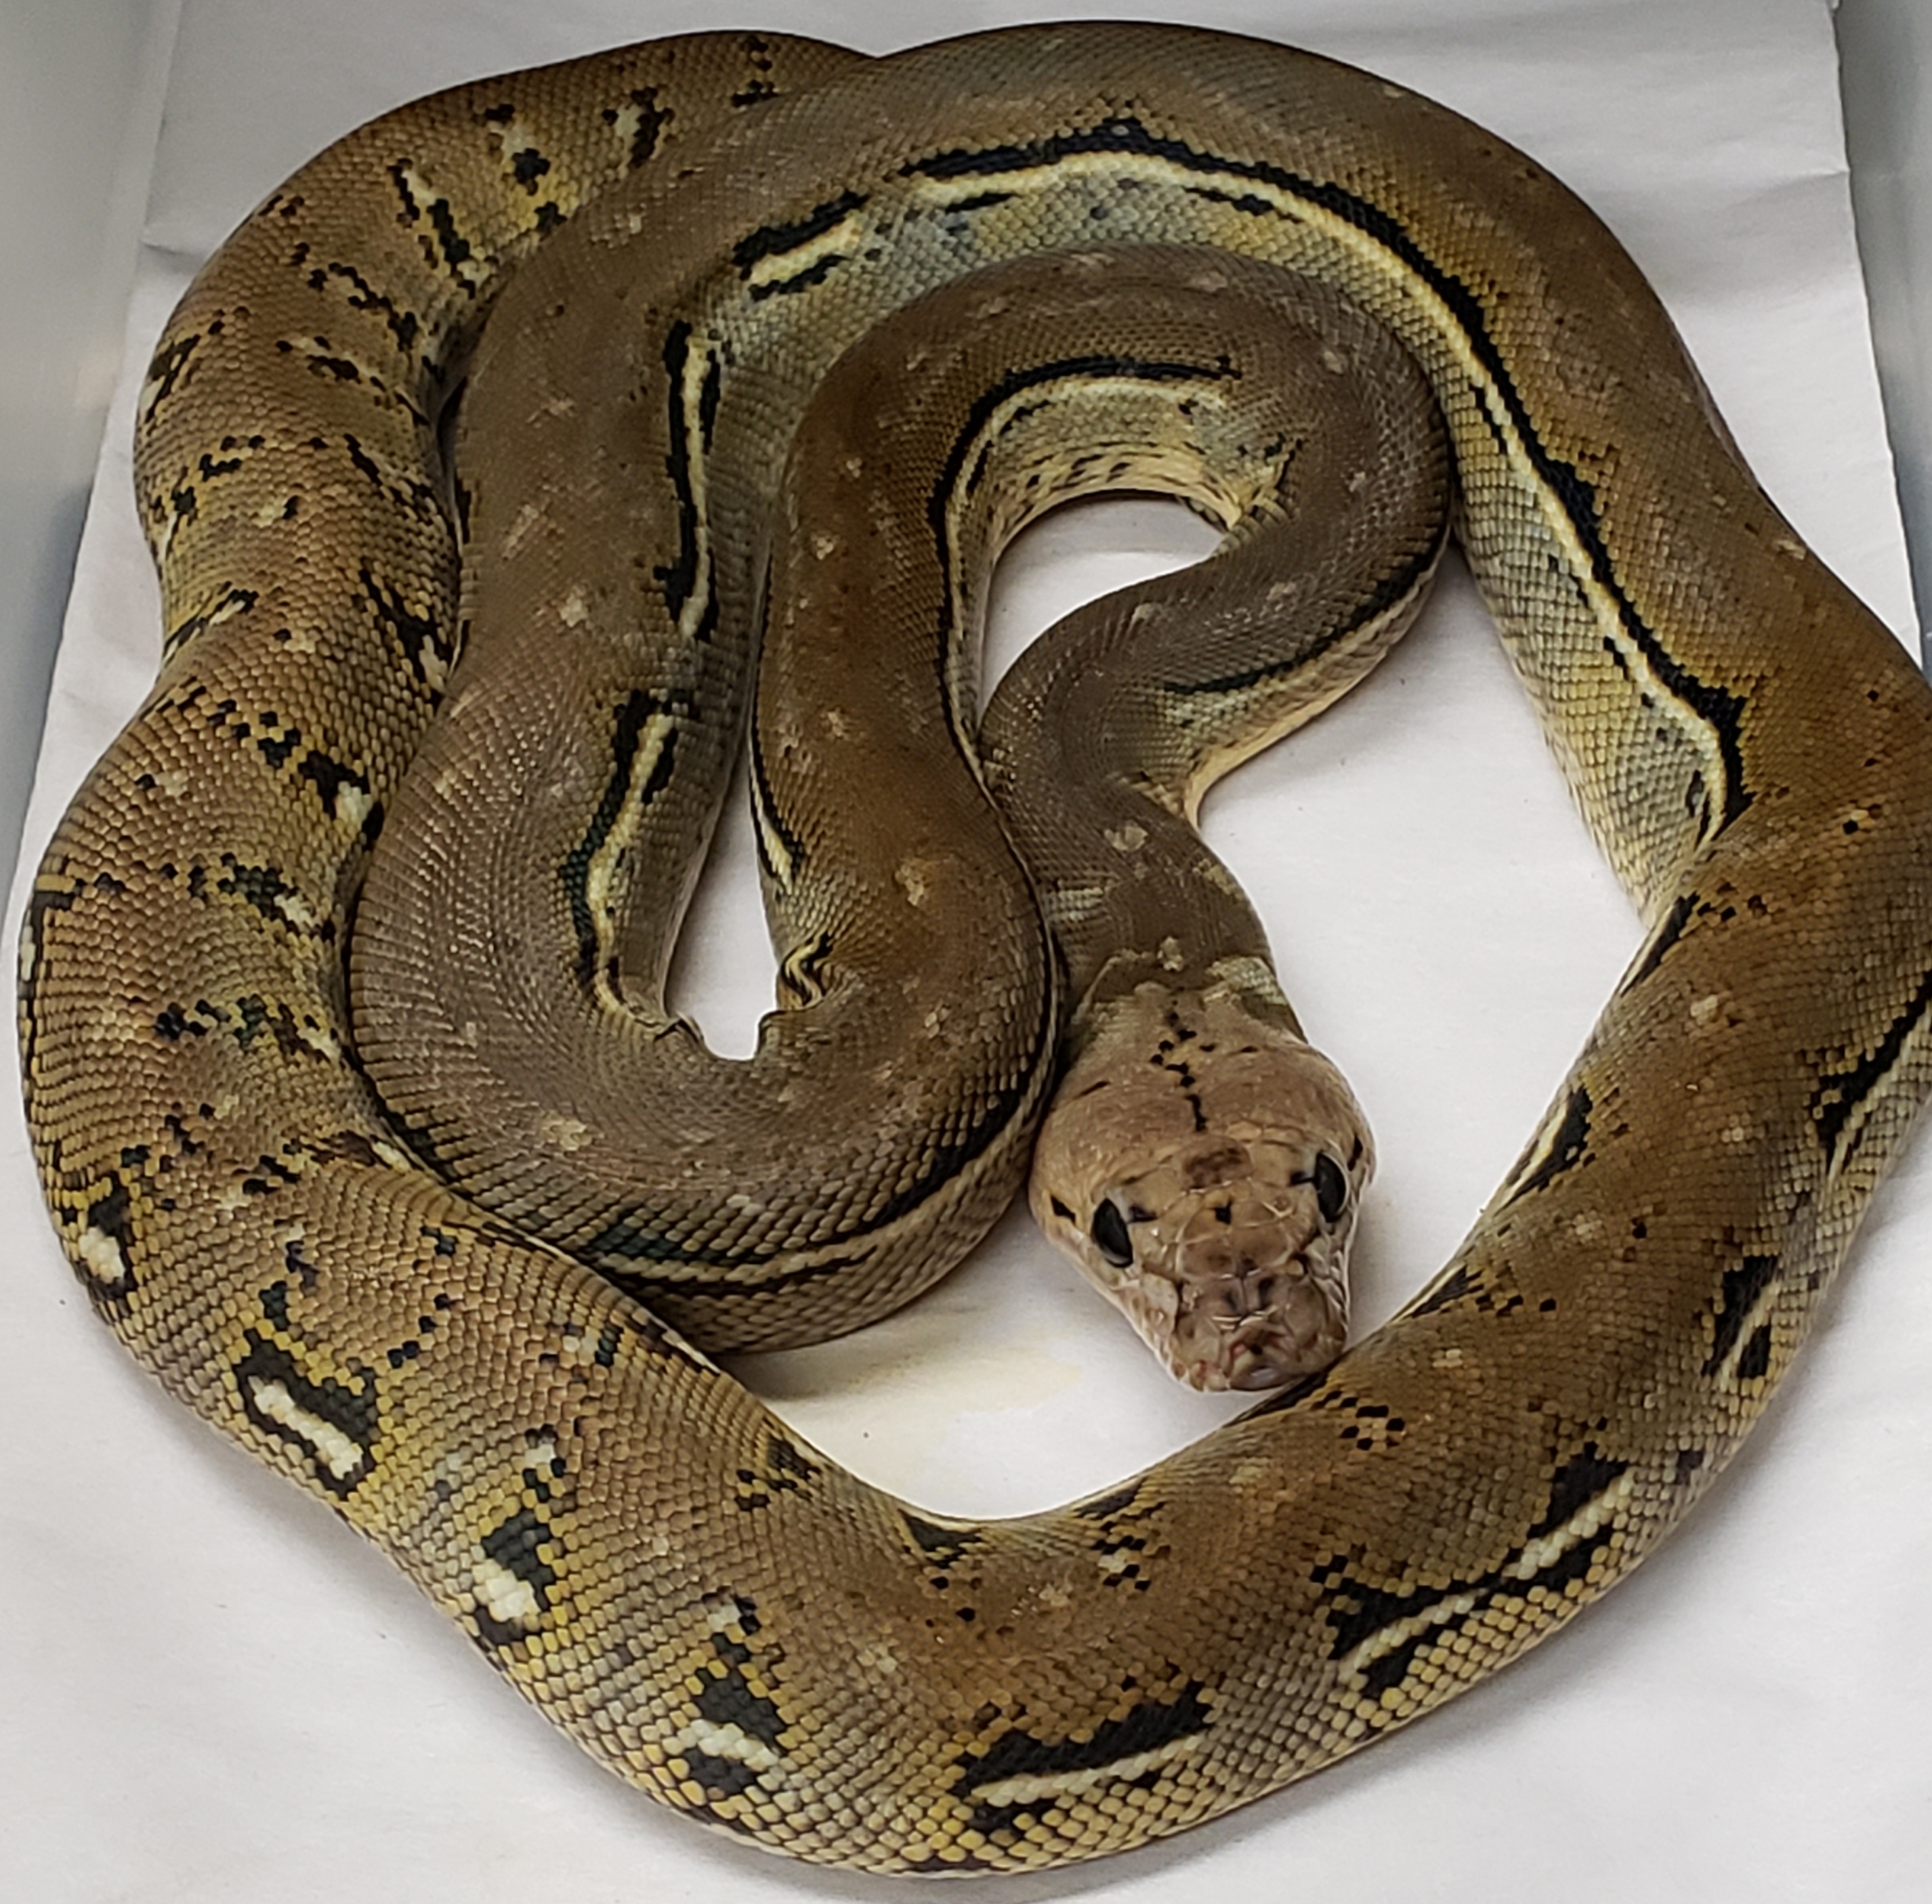 Anthrax Reticulated Python by In Your Face Exotix